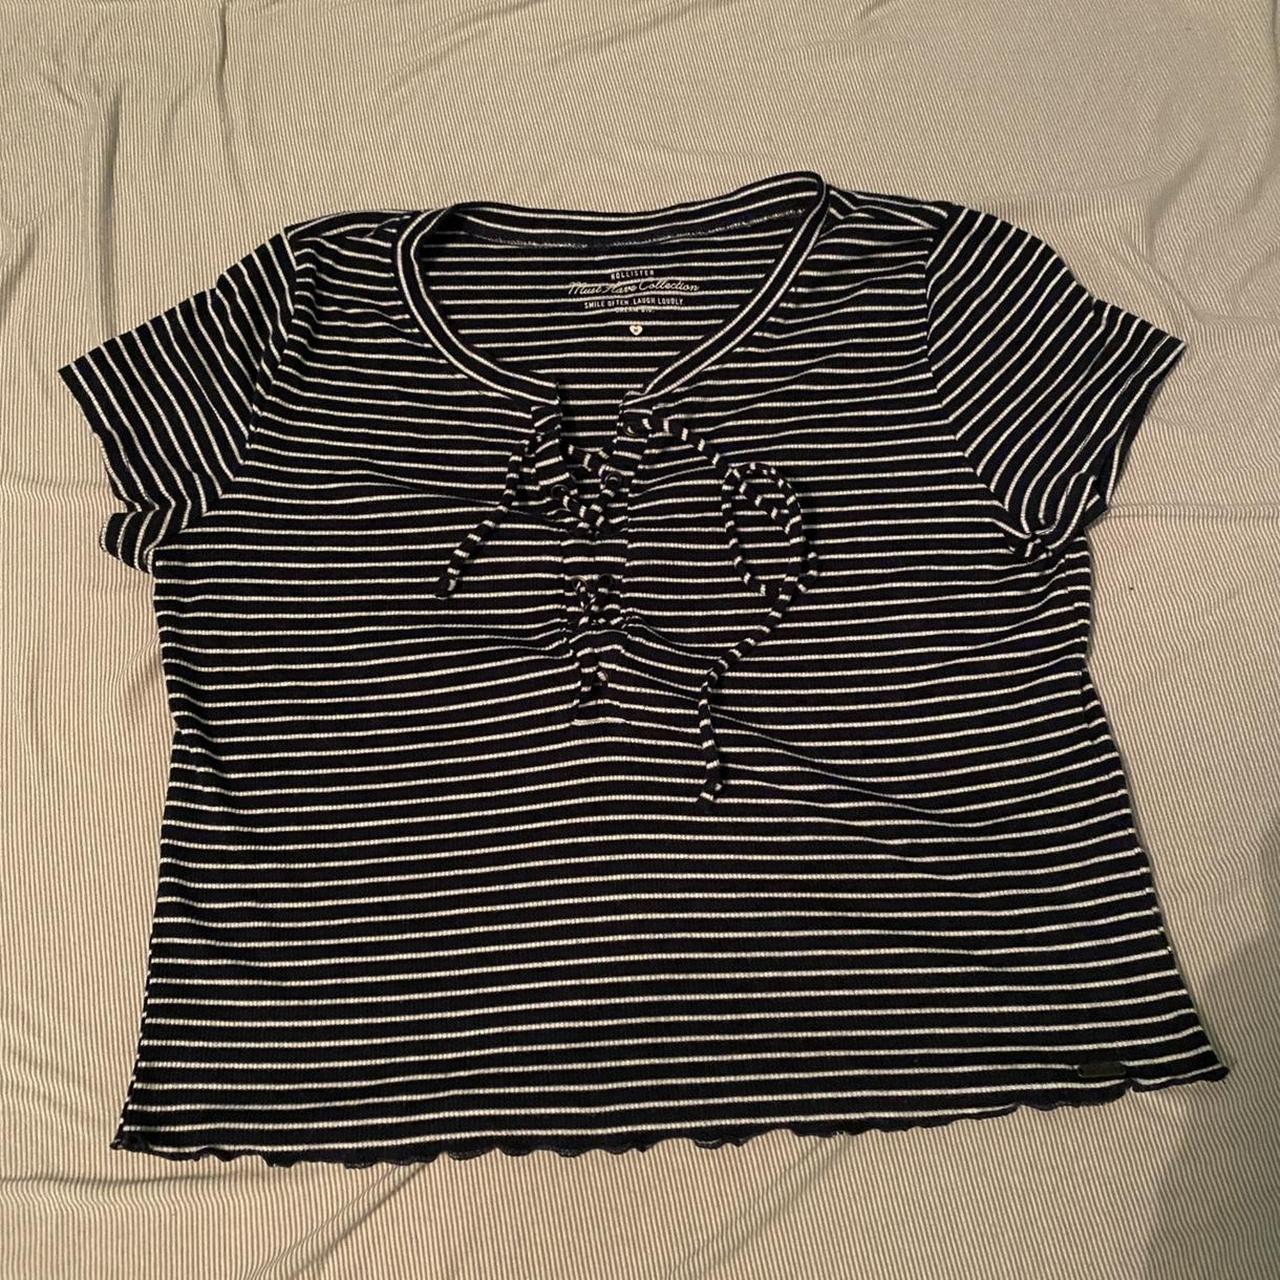 This is a shirt from Hollister Women's size - Depop